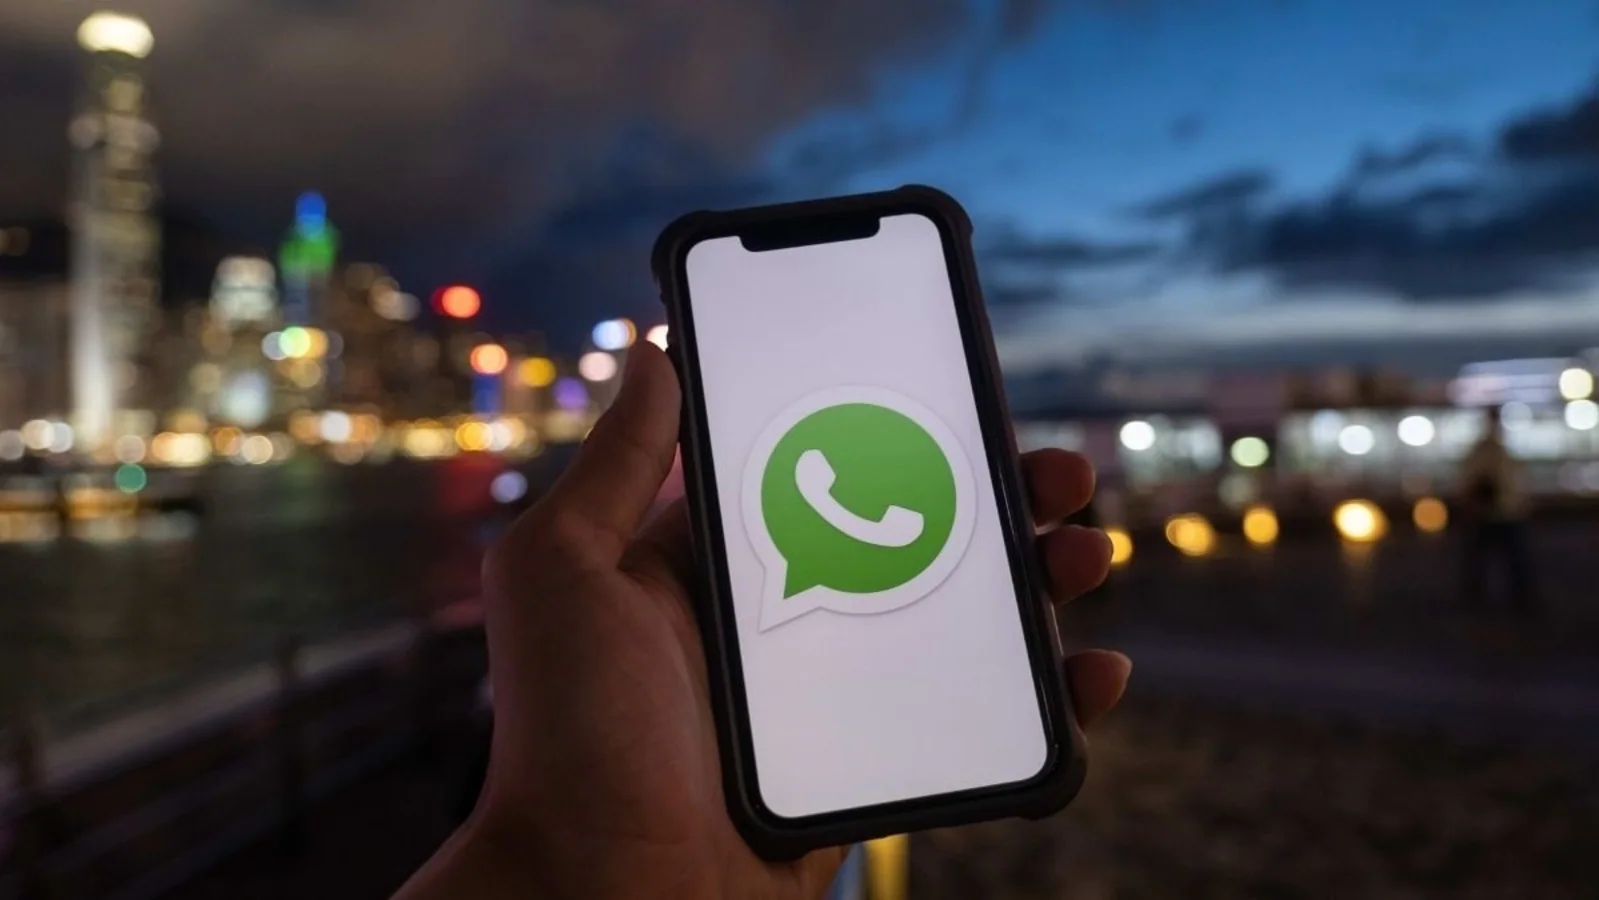 How Do You Use the Same WhatsApp Account on Two Phones?